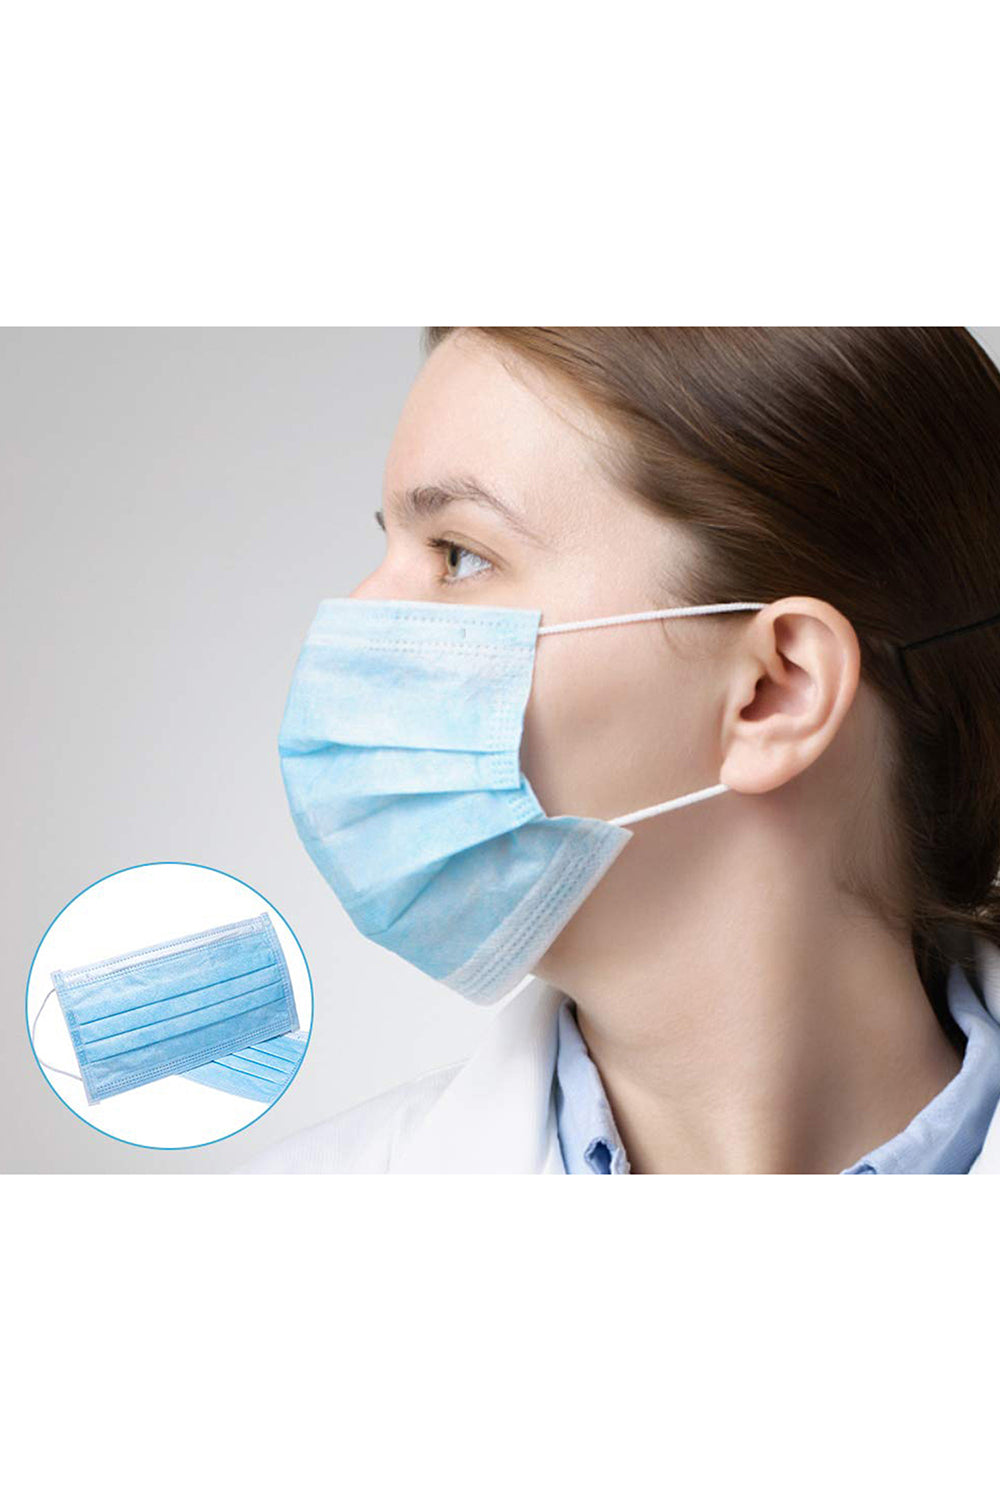 Gift-Not for Sale 1 Pcs Disposable Face Masks with Elastic Ear Loop 3 Ply for Blocking Dust Air Pollution Protectio